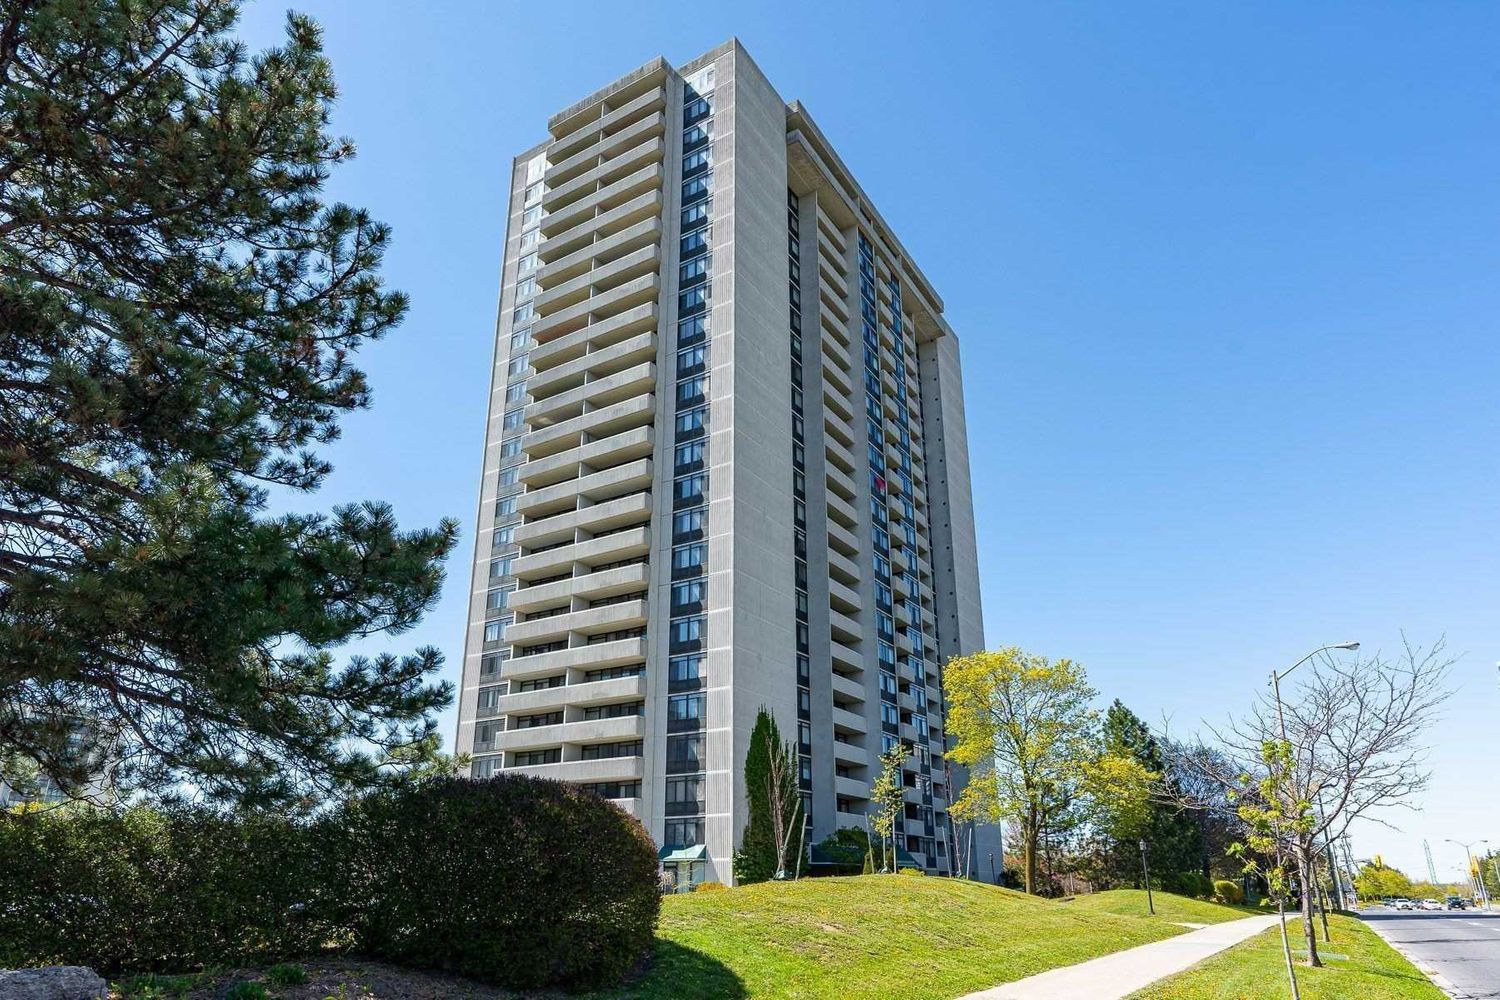 3300 Don Mills Rd. This condo at High Point Condos is located in  North York, Toronto - image #1 of 2 by Strata.ca